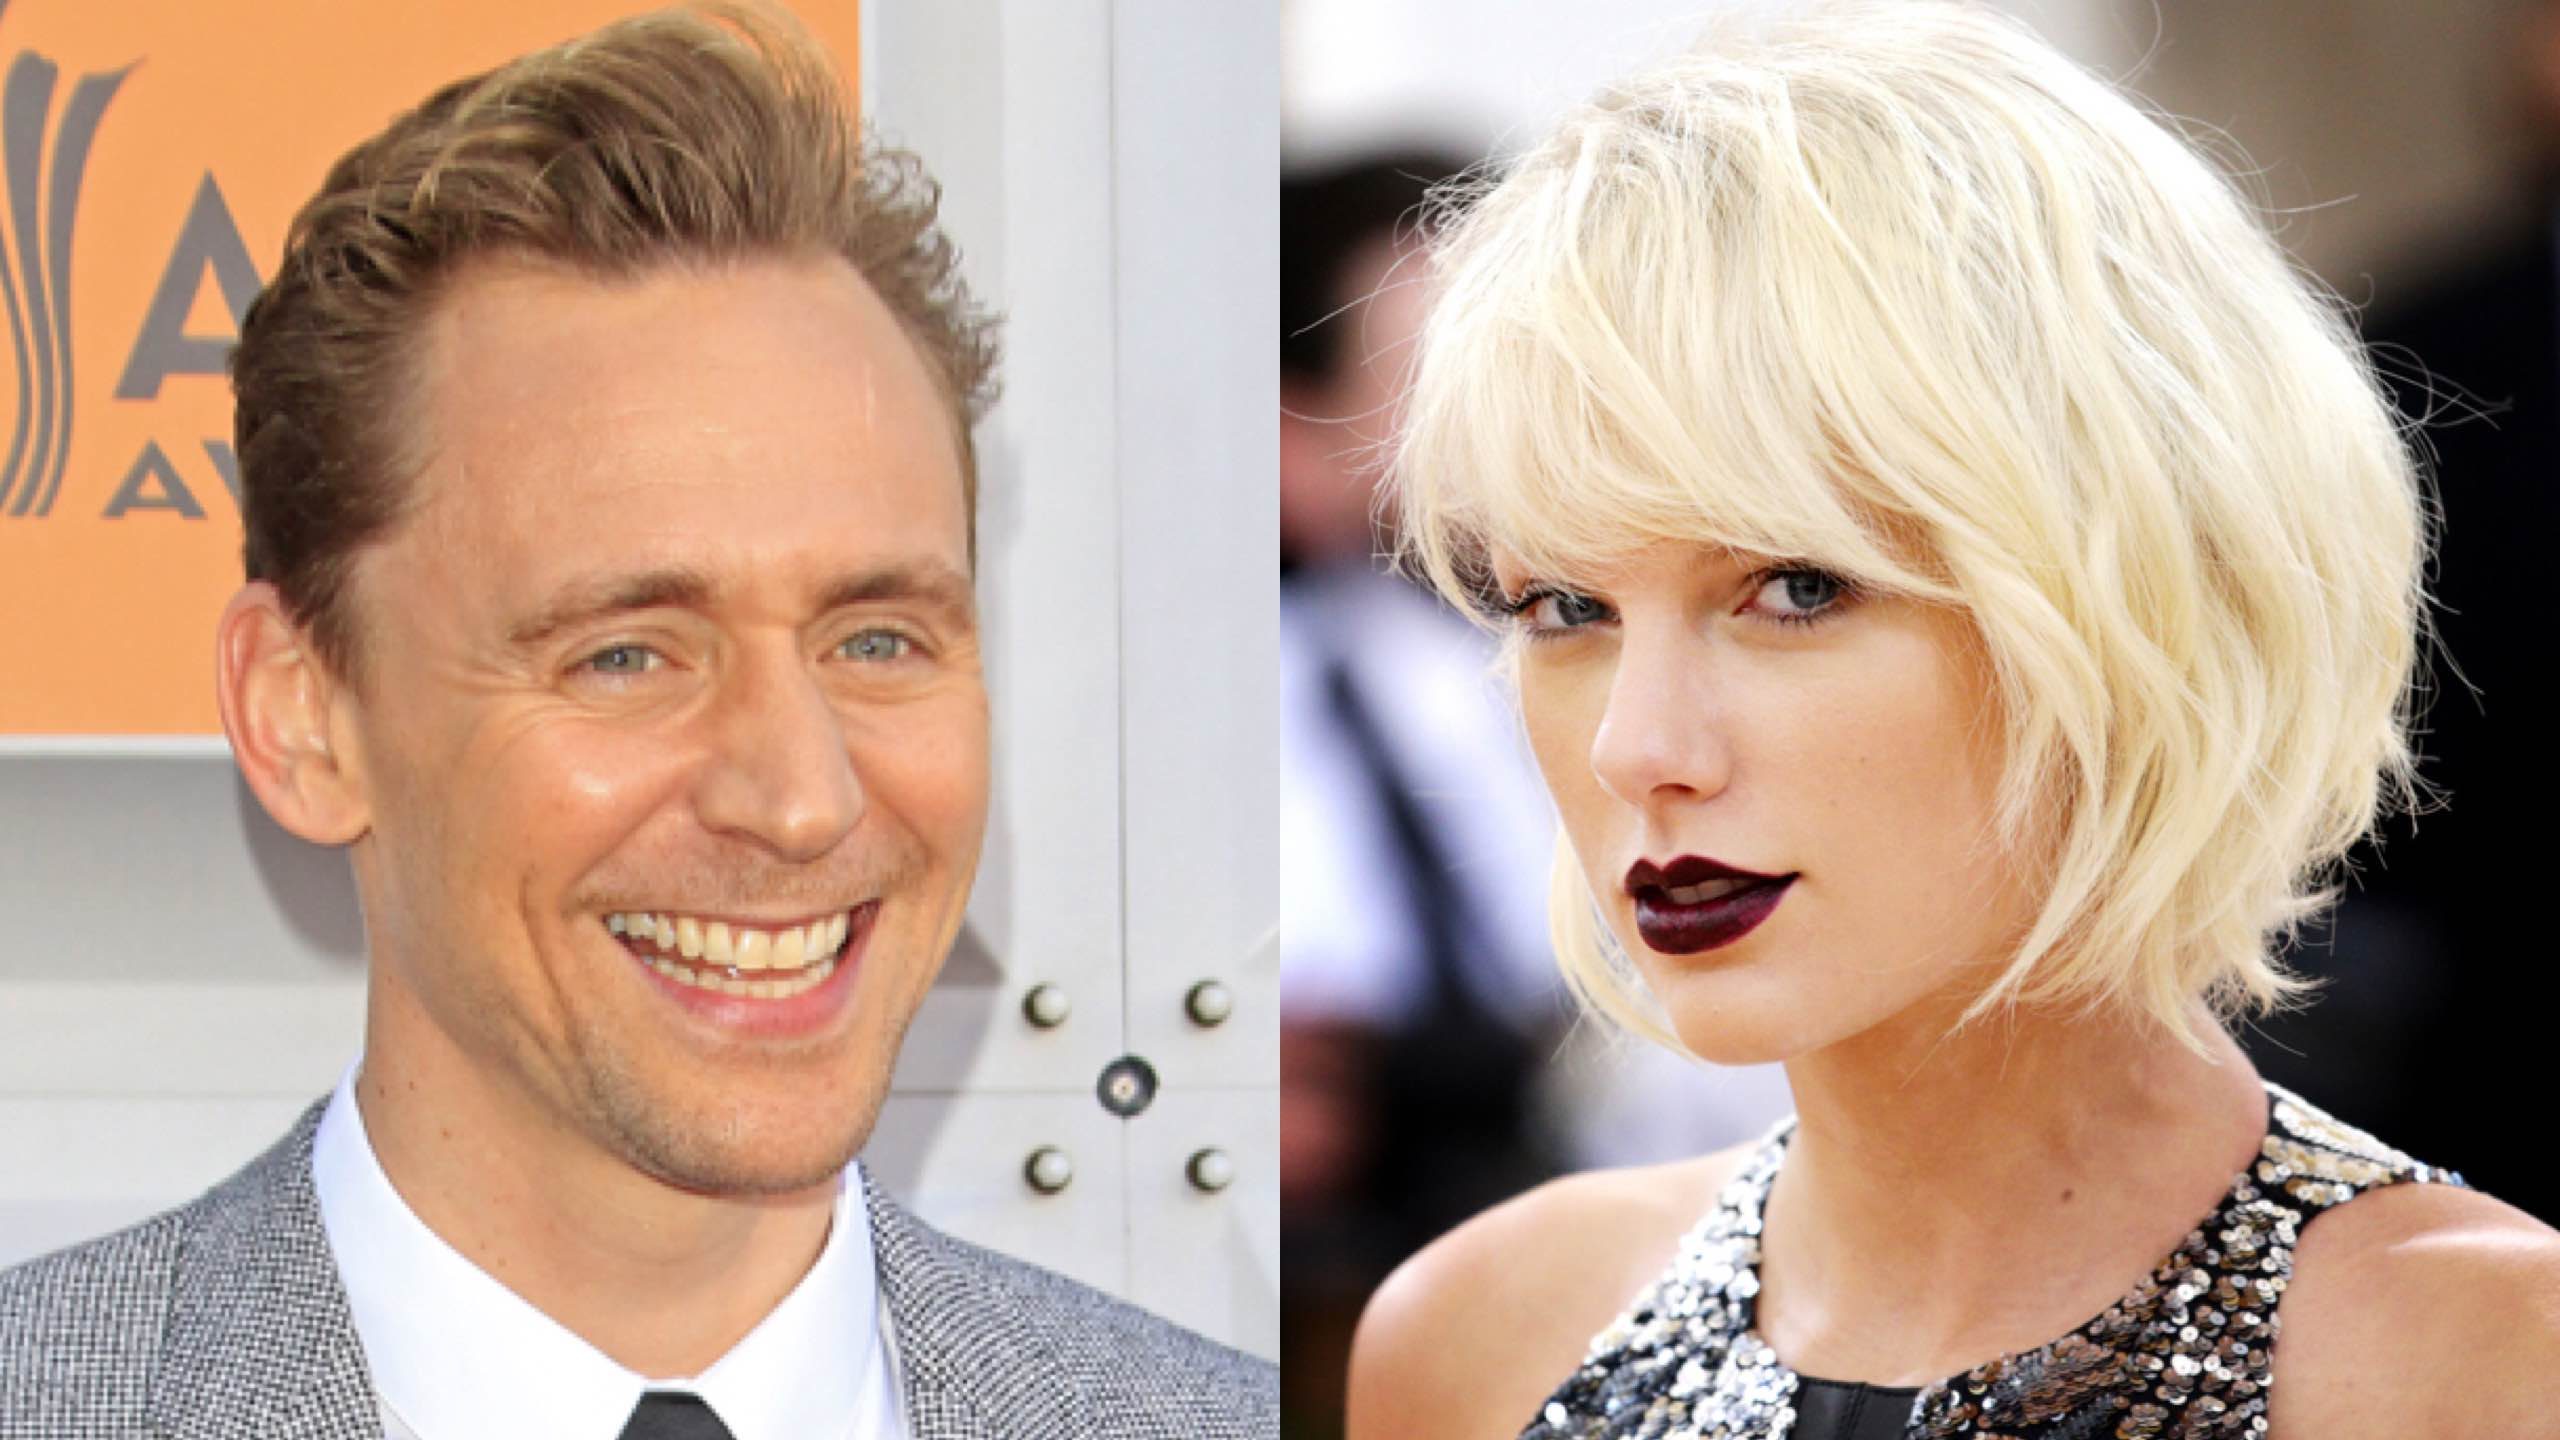 Taylor Swift, Tom Hiddleston are dating – report